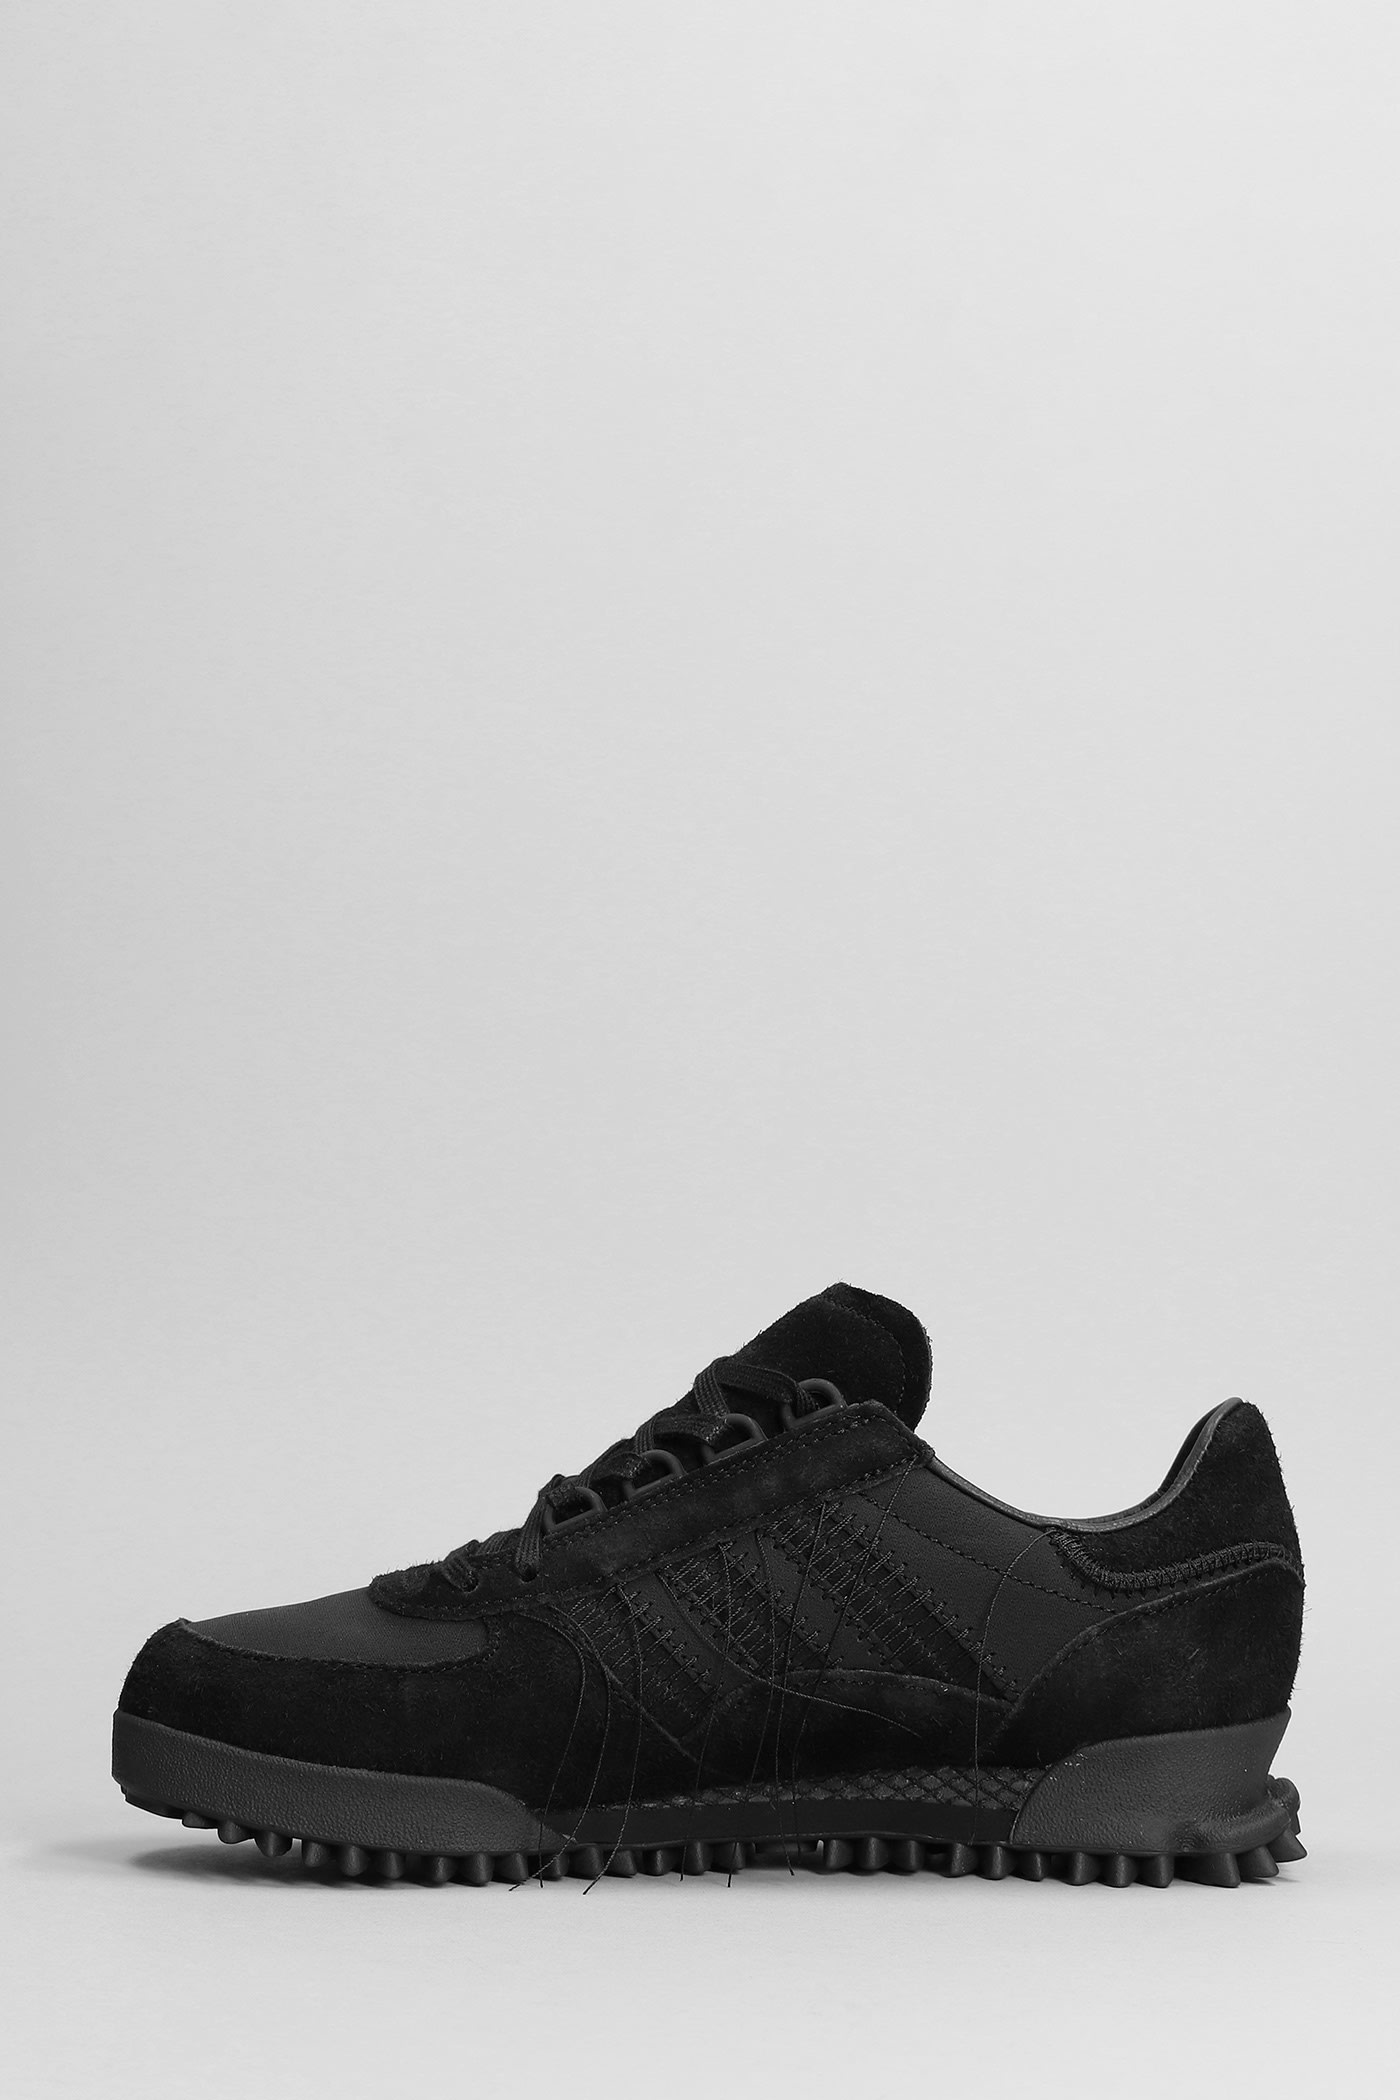 Y-3 Sneakers In Black Suede And Leather | ModeSens